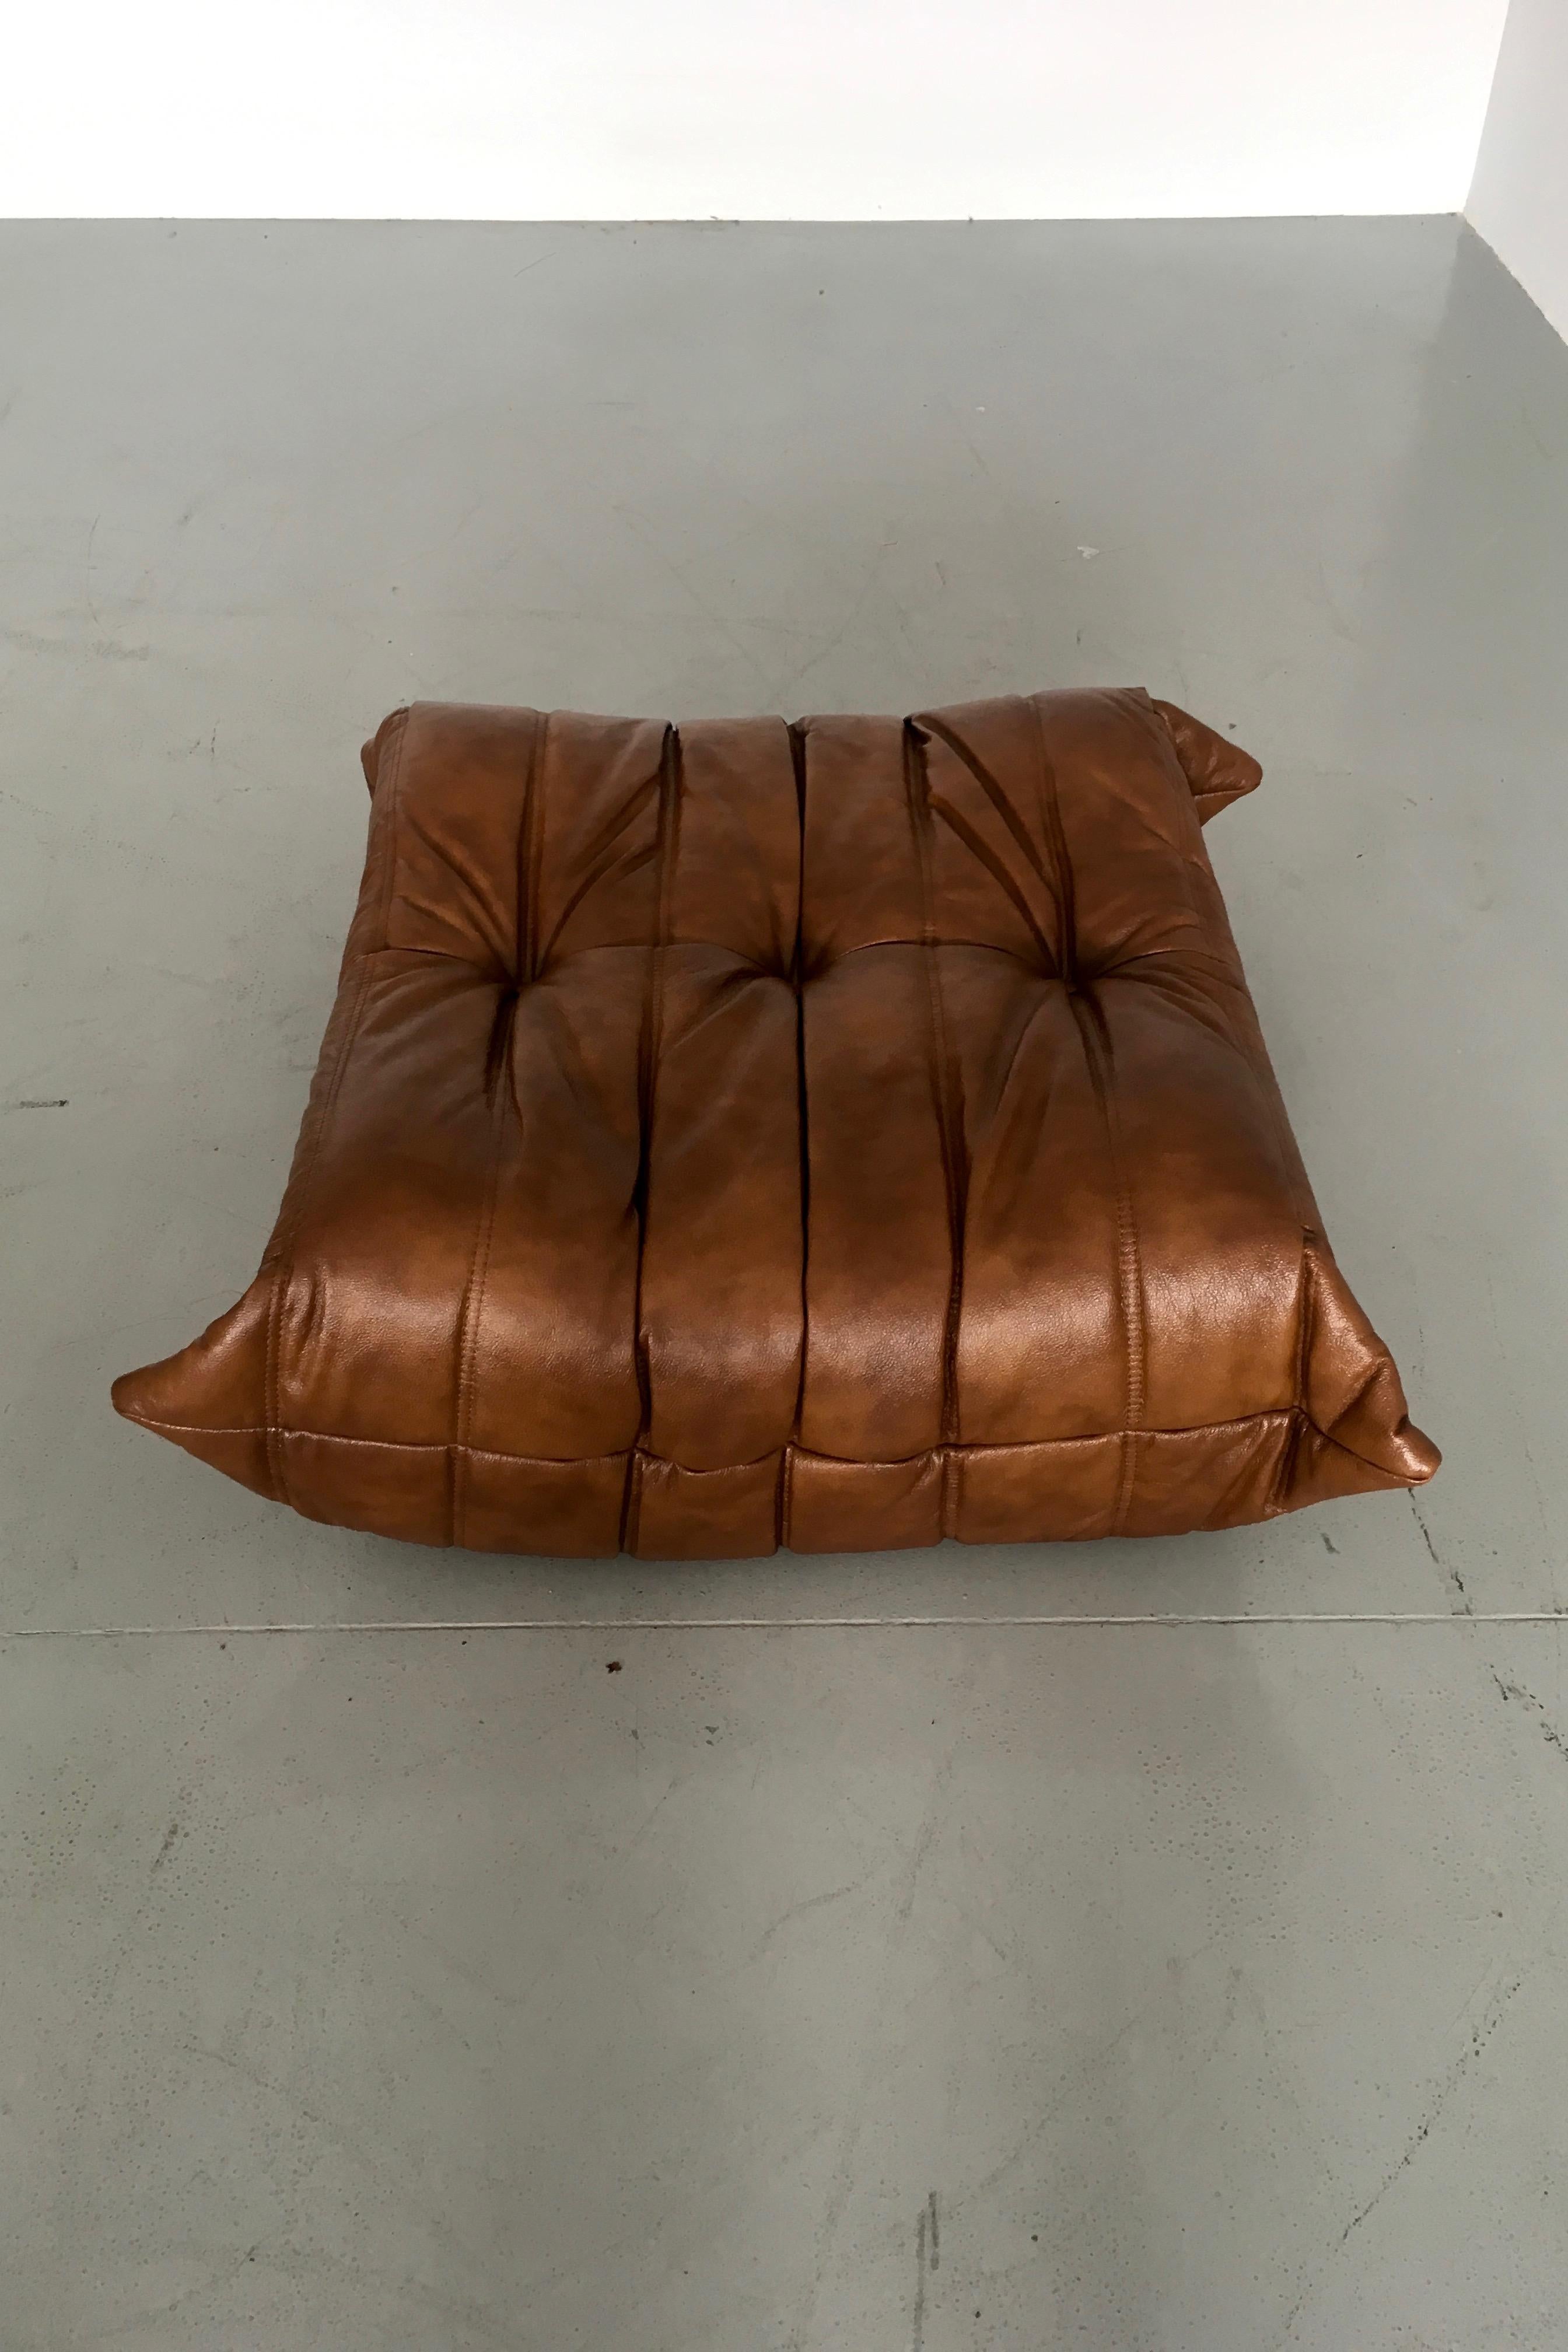 This Togo ottoman was designed by Michel Ducaroy in the 1973 and was manufactured by Ligne Roset in France, produced in 1990s. It has been reupholstered in new whiskey leather (87 x 80 x 34 cm). It has the original Ligne Roset logo and genuine Ligne